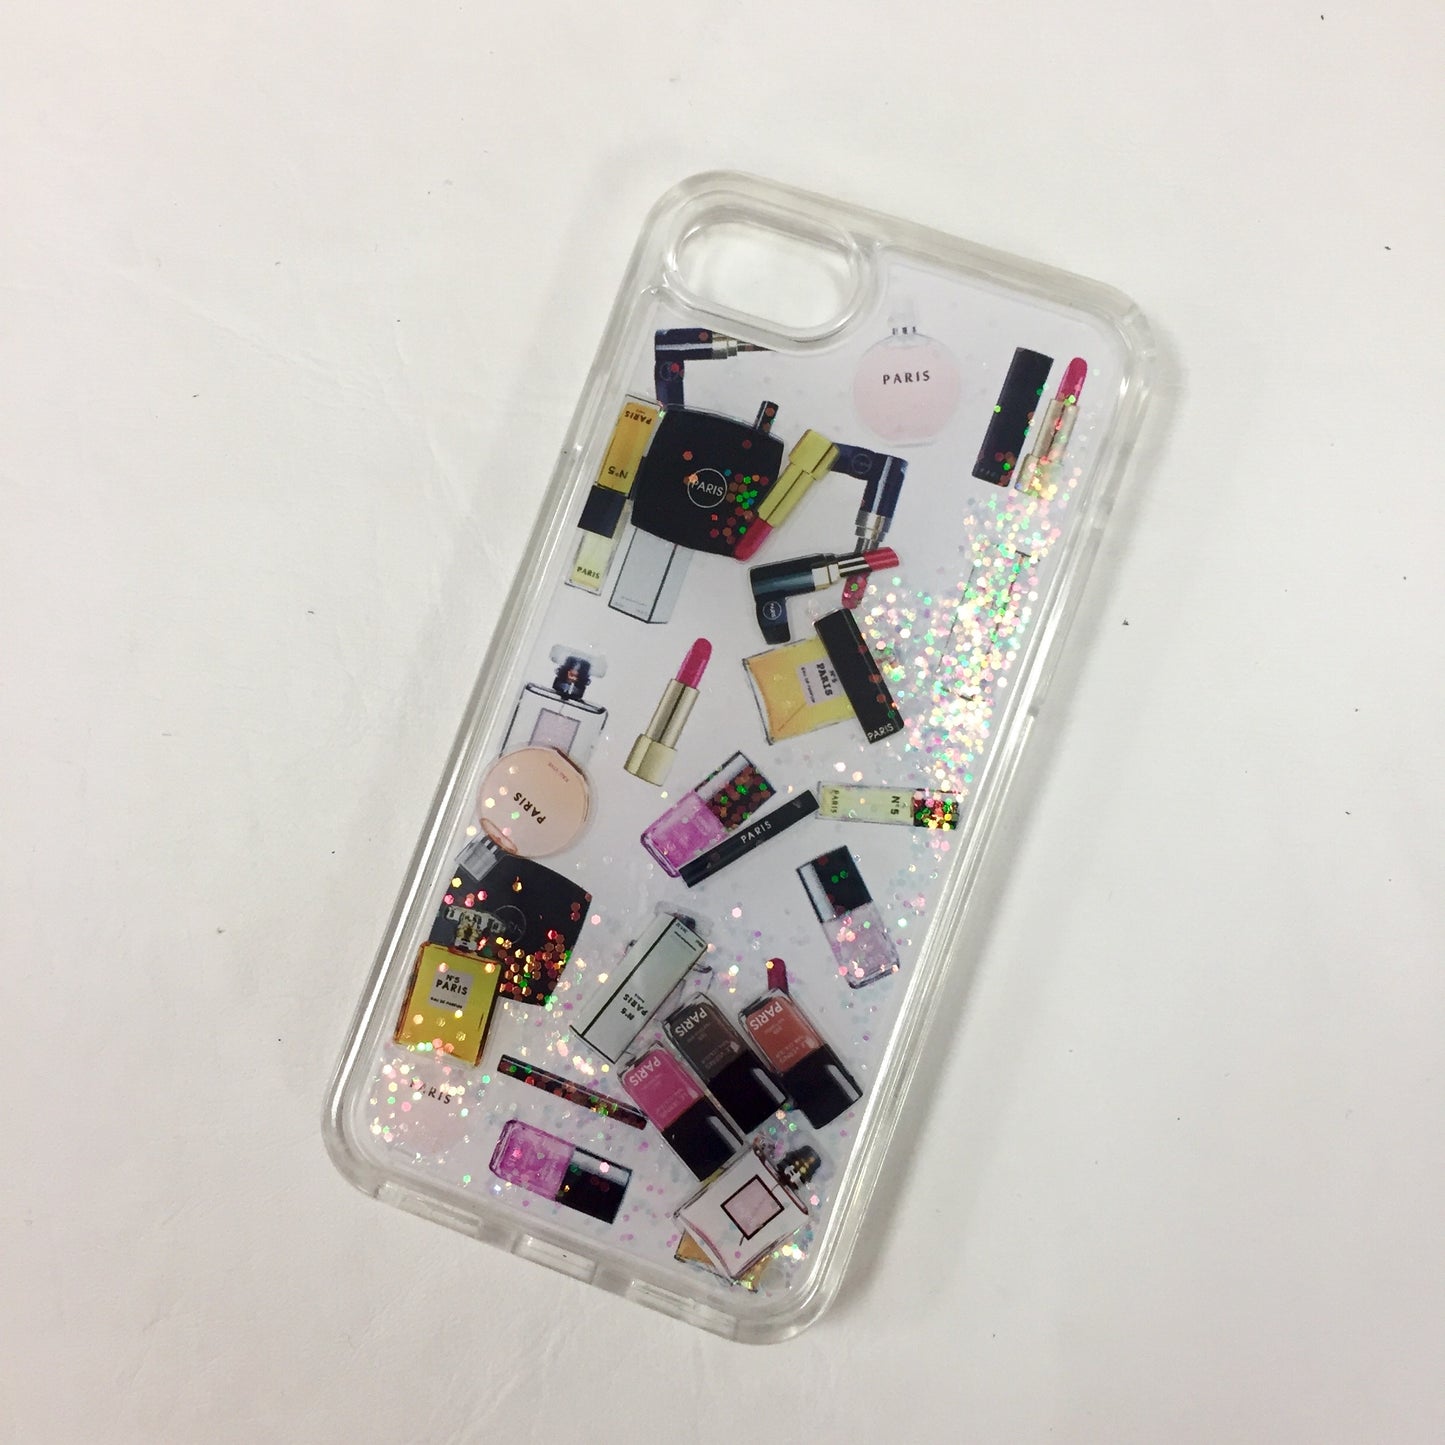 Authentic Glitter Makeup "Waterfall" iPhone Case